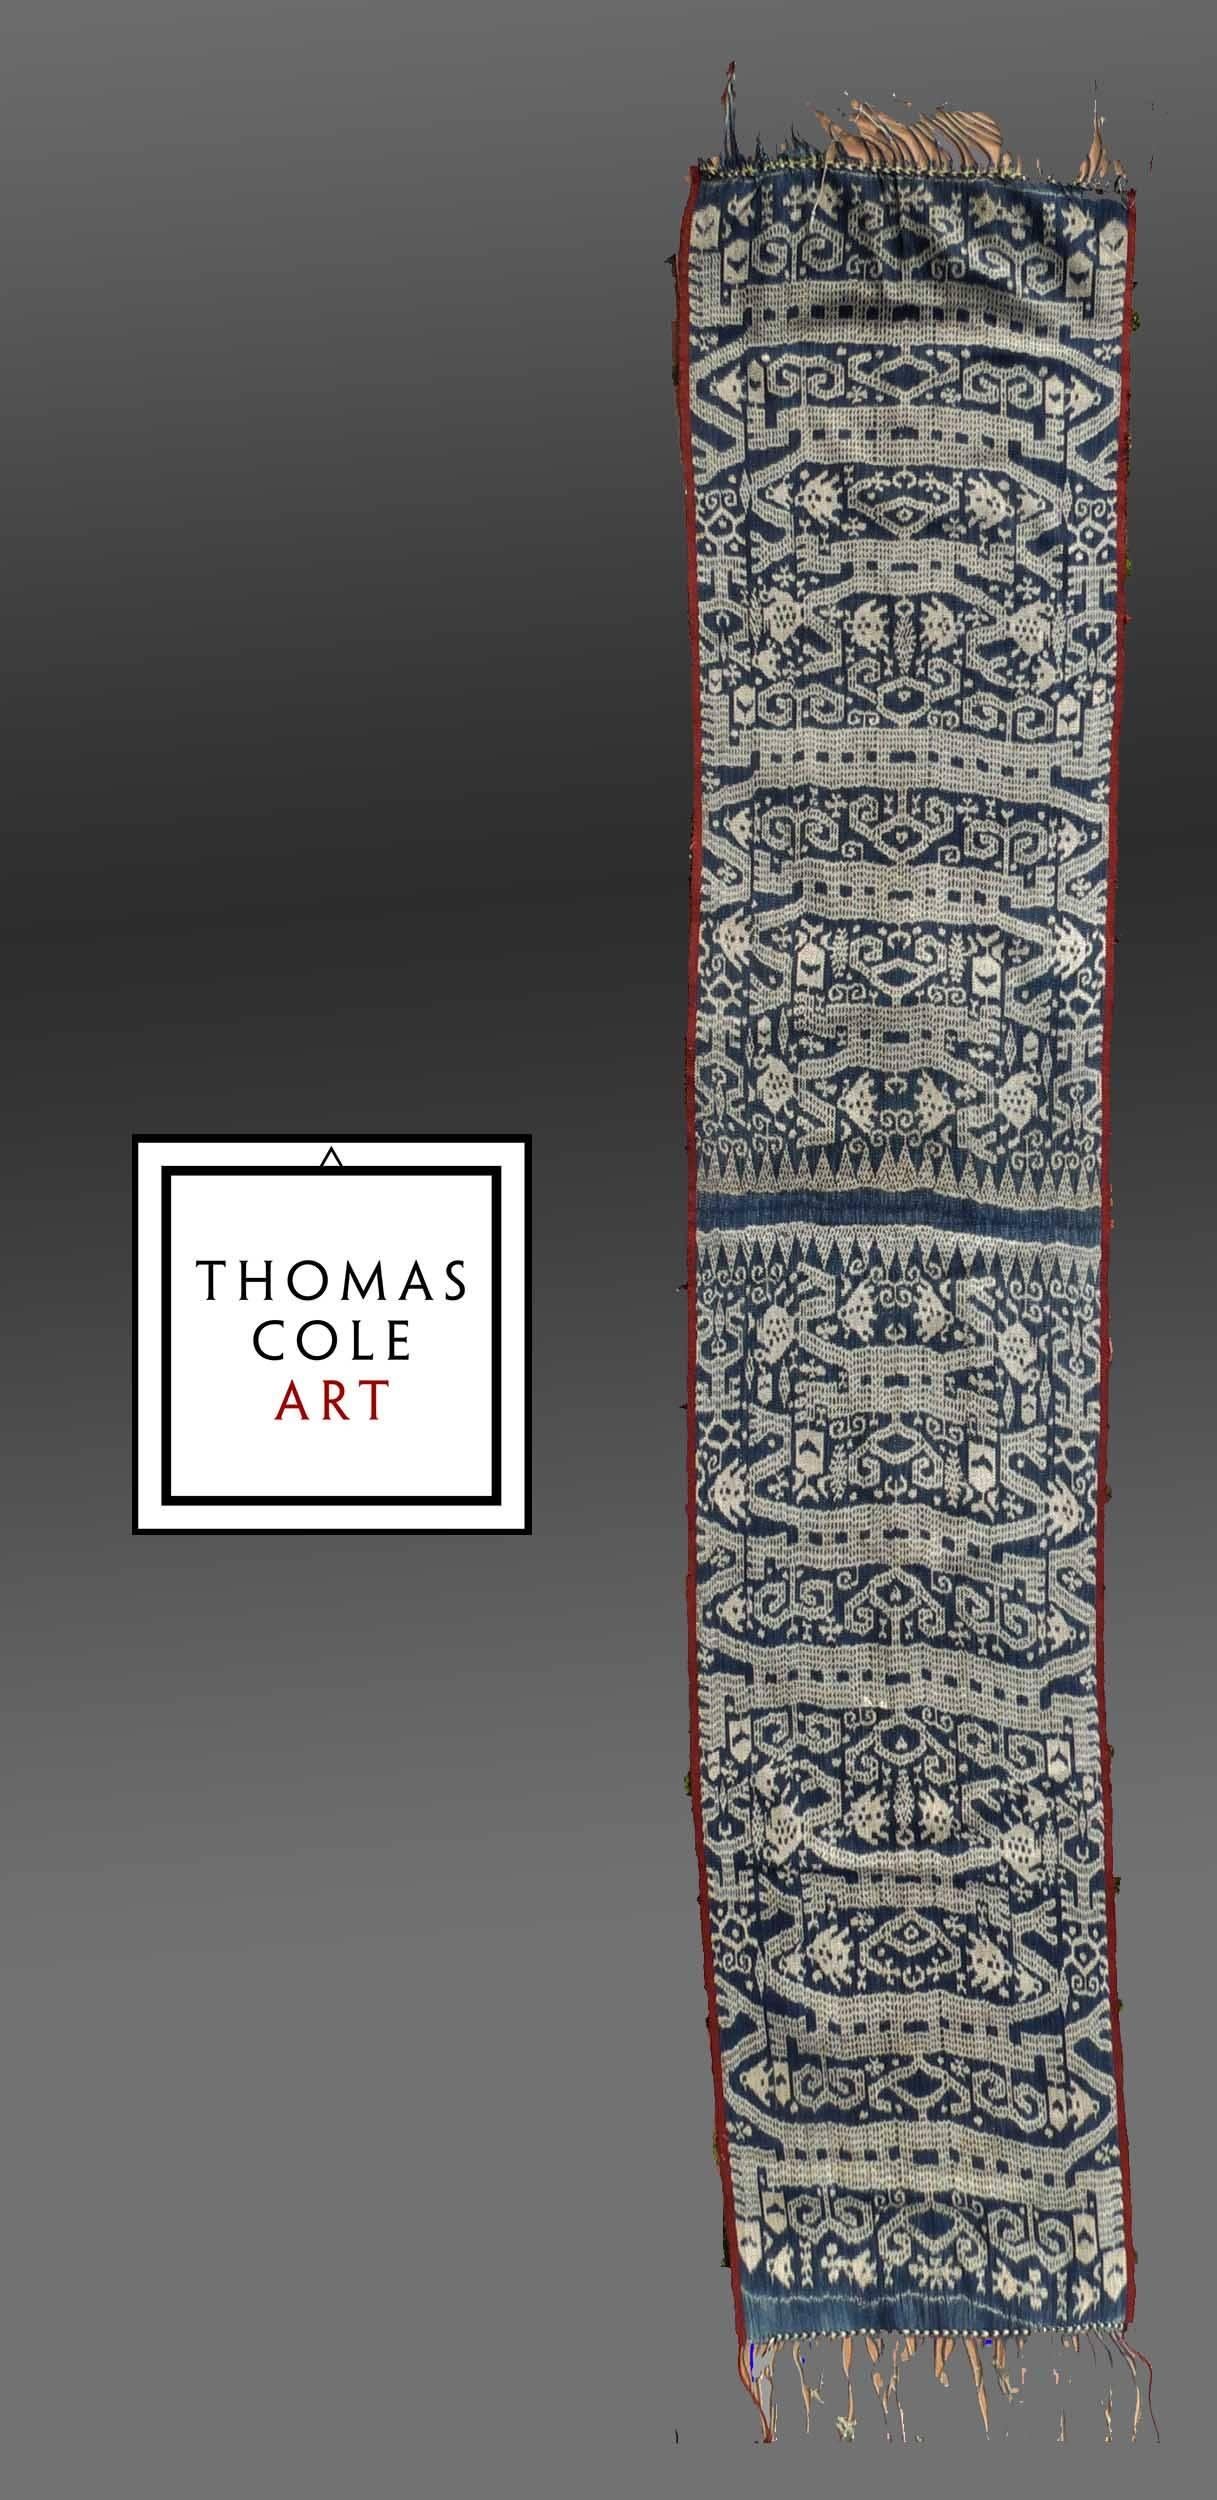 A man's cloth belt from West Timor, composed of cotton woven in utilizing an Ikat technique. Mounted, and hung in the right place, it presents a wonderful image hearkening back to our most Primitive roots as members of the human species. 

The